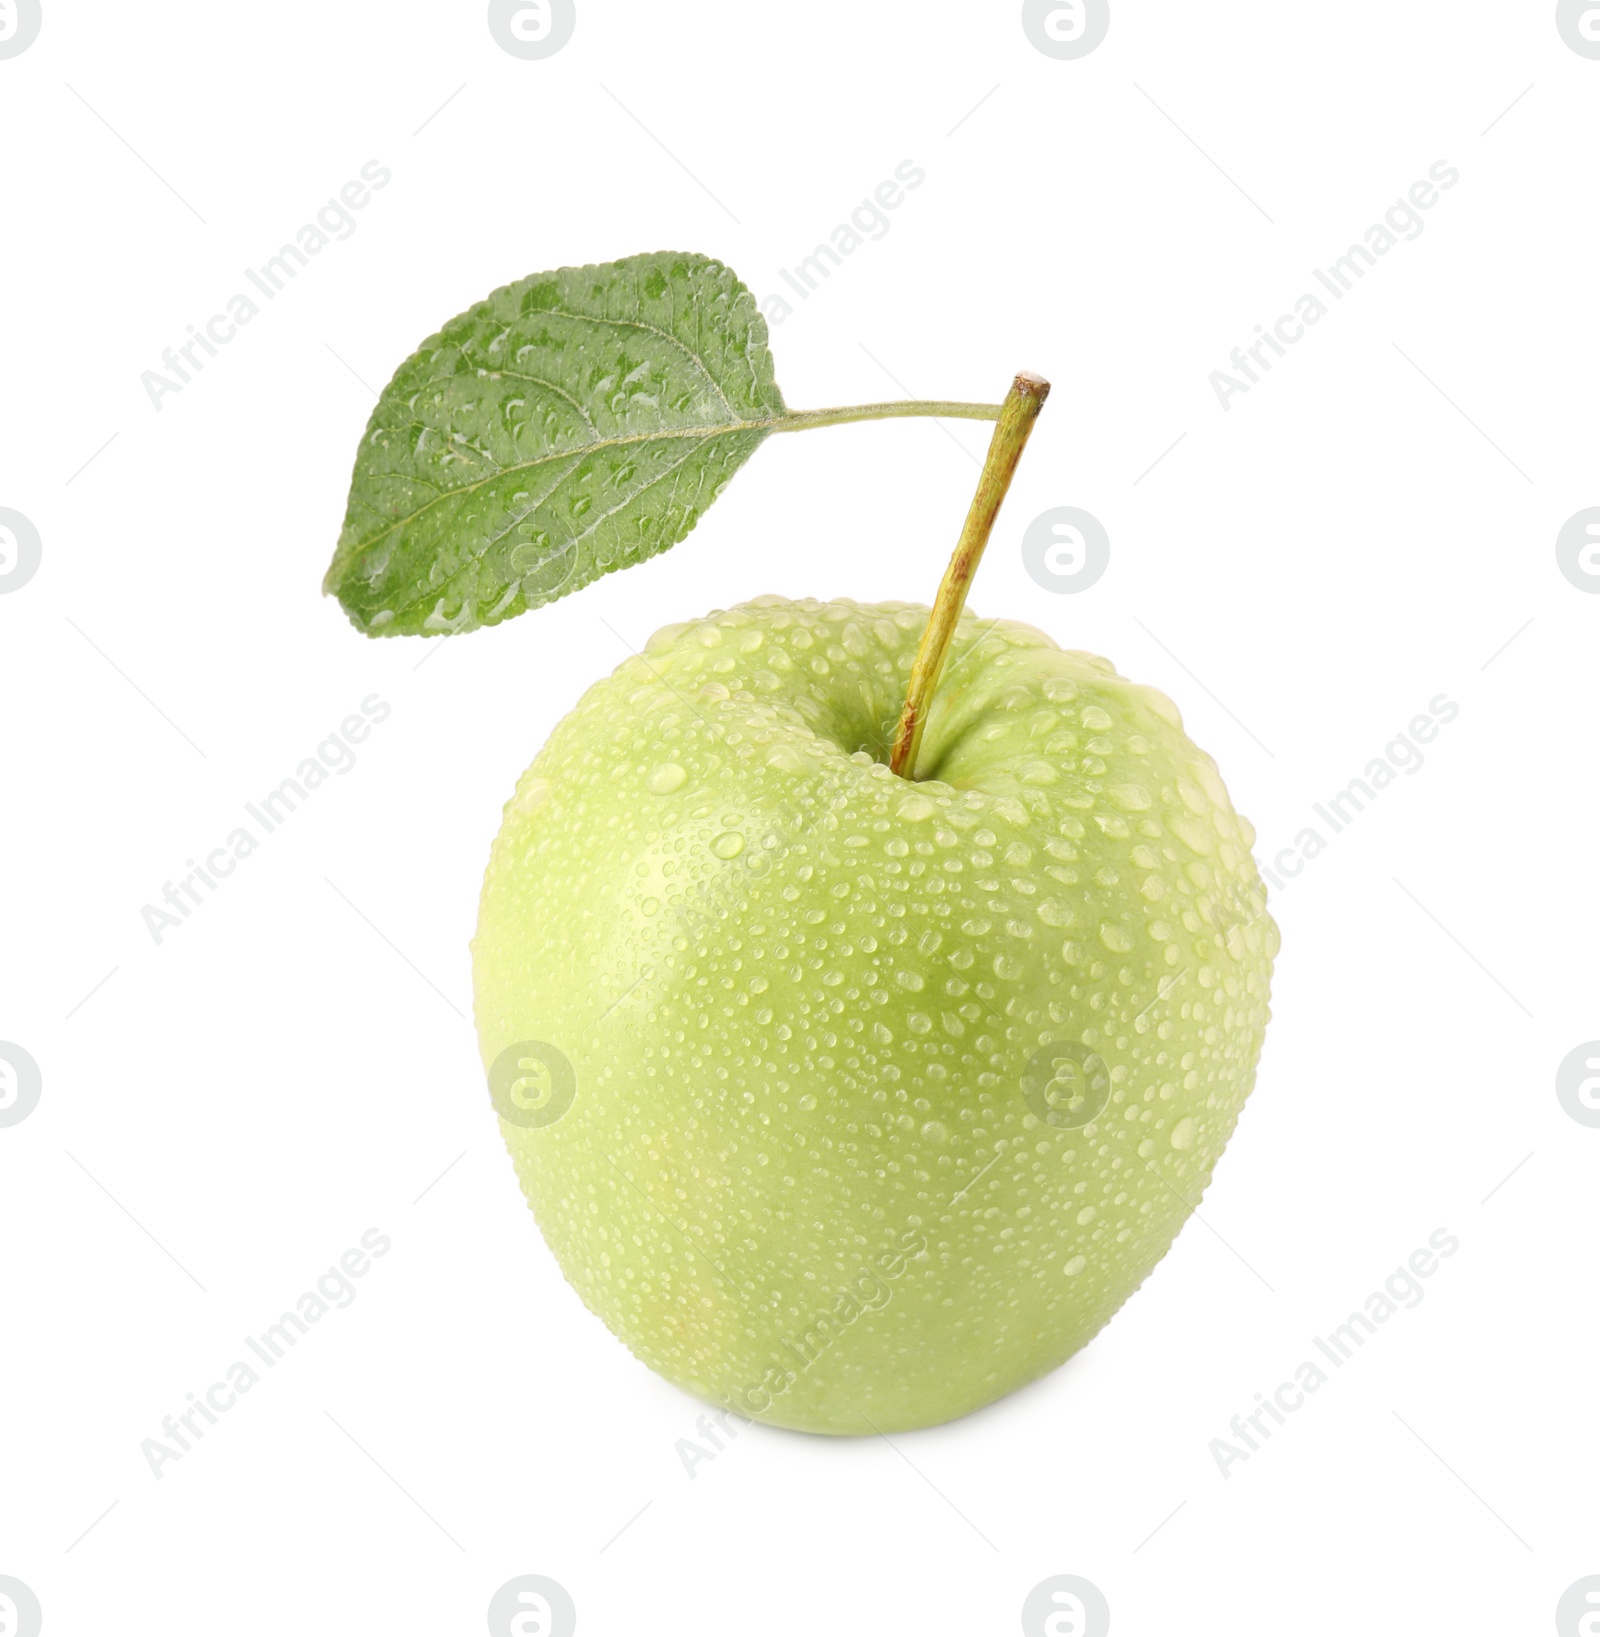 Photo of Wet ripe green apple with leaf isolated on white